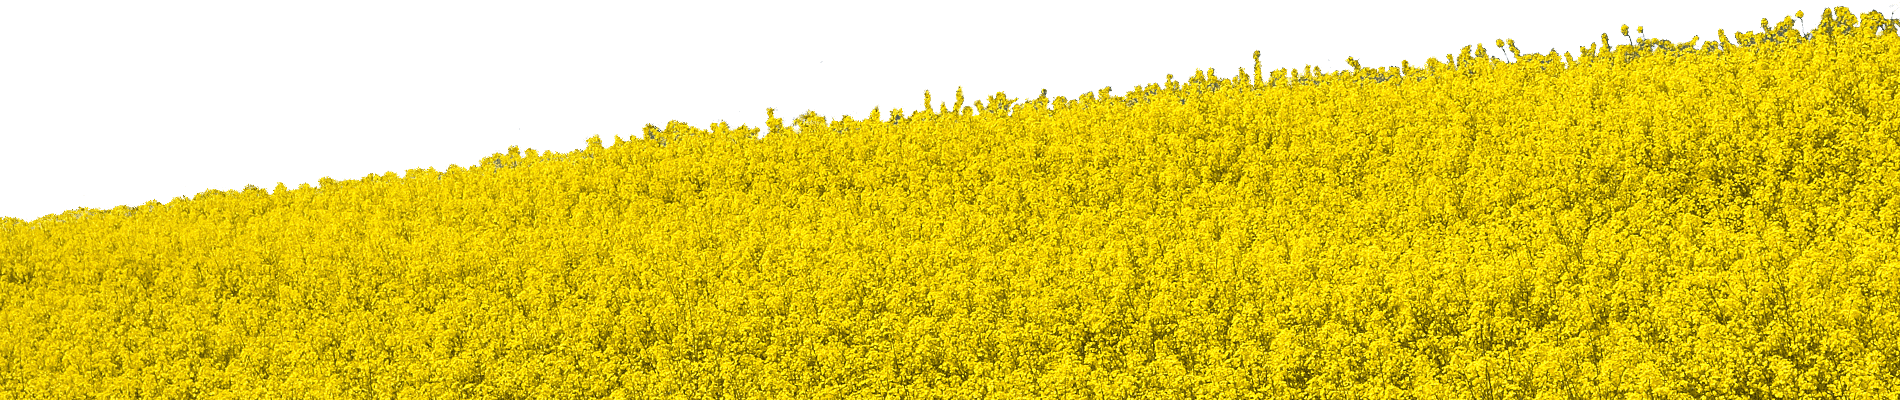 Field PNG Free Image